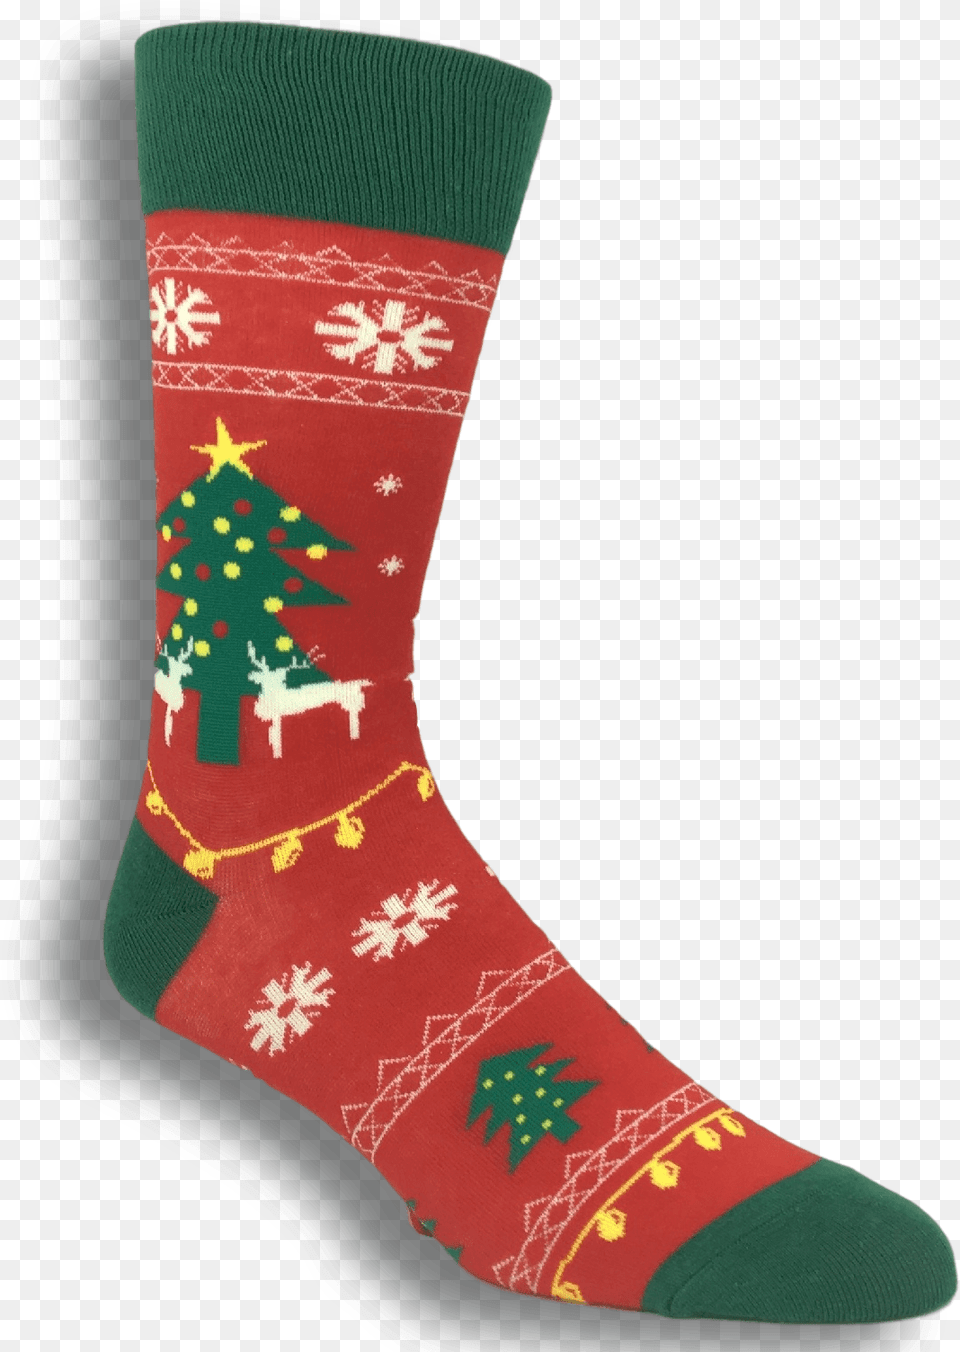 Sock, Clothing, Hosiery, Christmas, Christmas Decorations Png Image